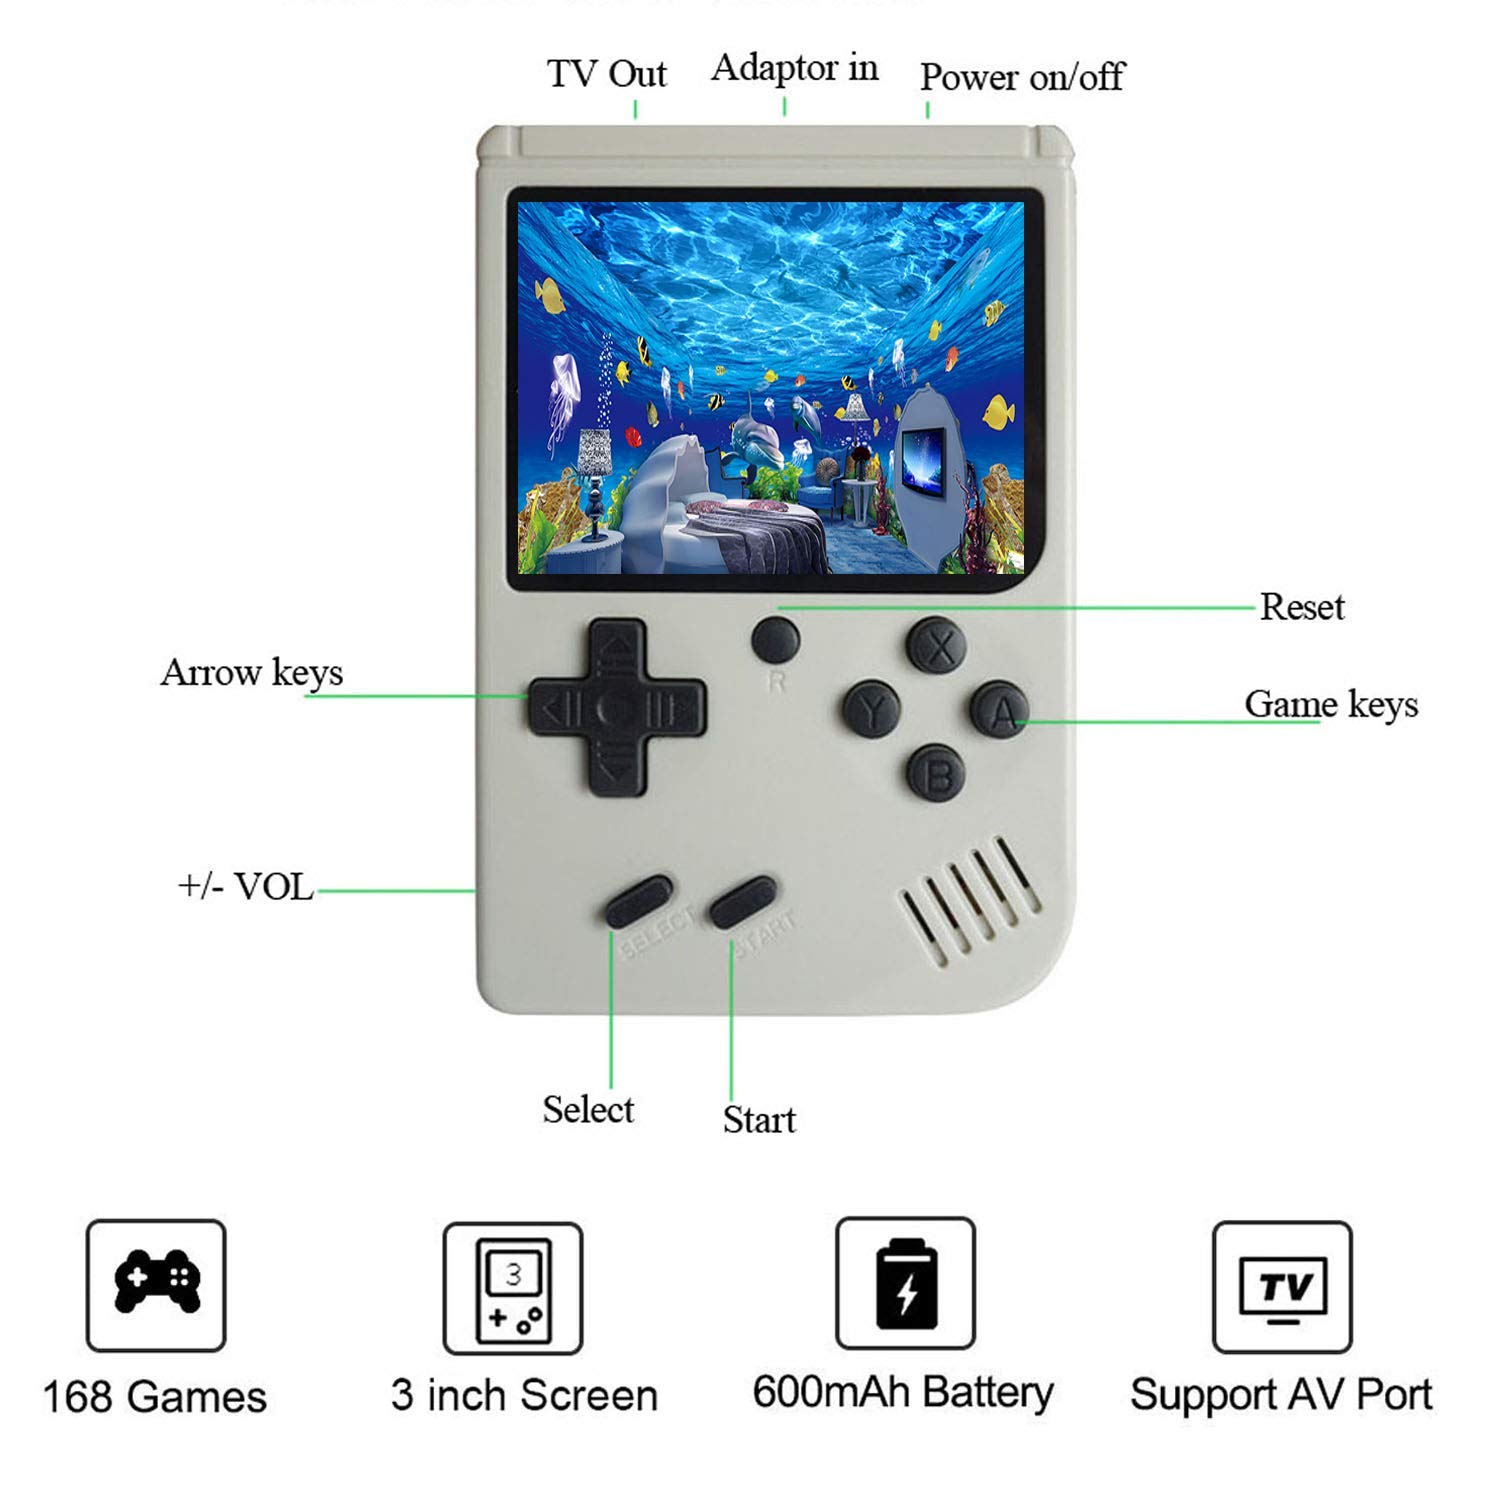 JAFATOY Retro Handheld Games Console for Kids/Adults, 168 Classic Games 8 Bit Games 3 inch Screen Video Games with AV Cable Play on TV (White)